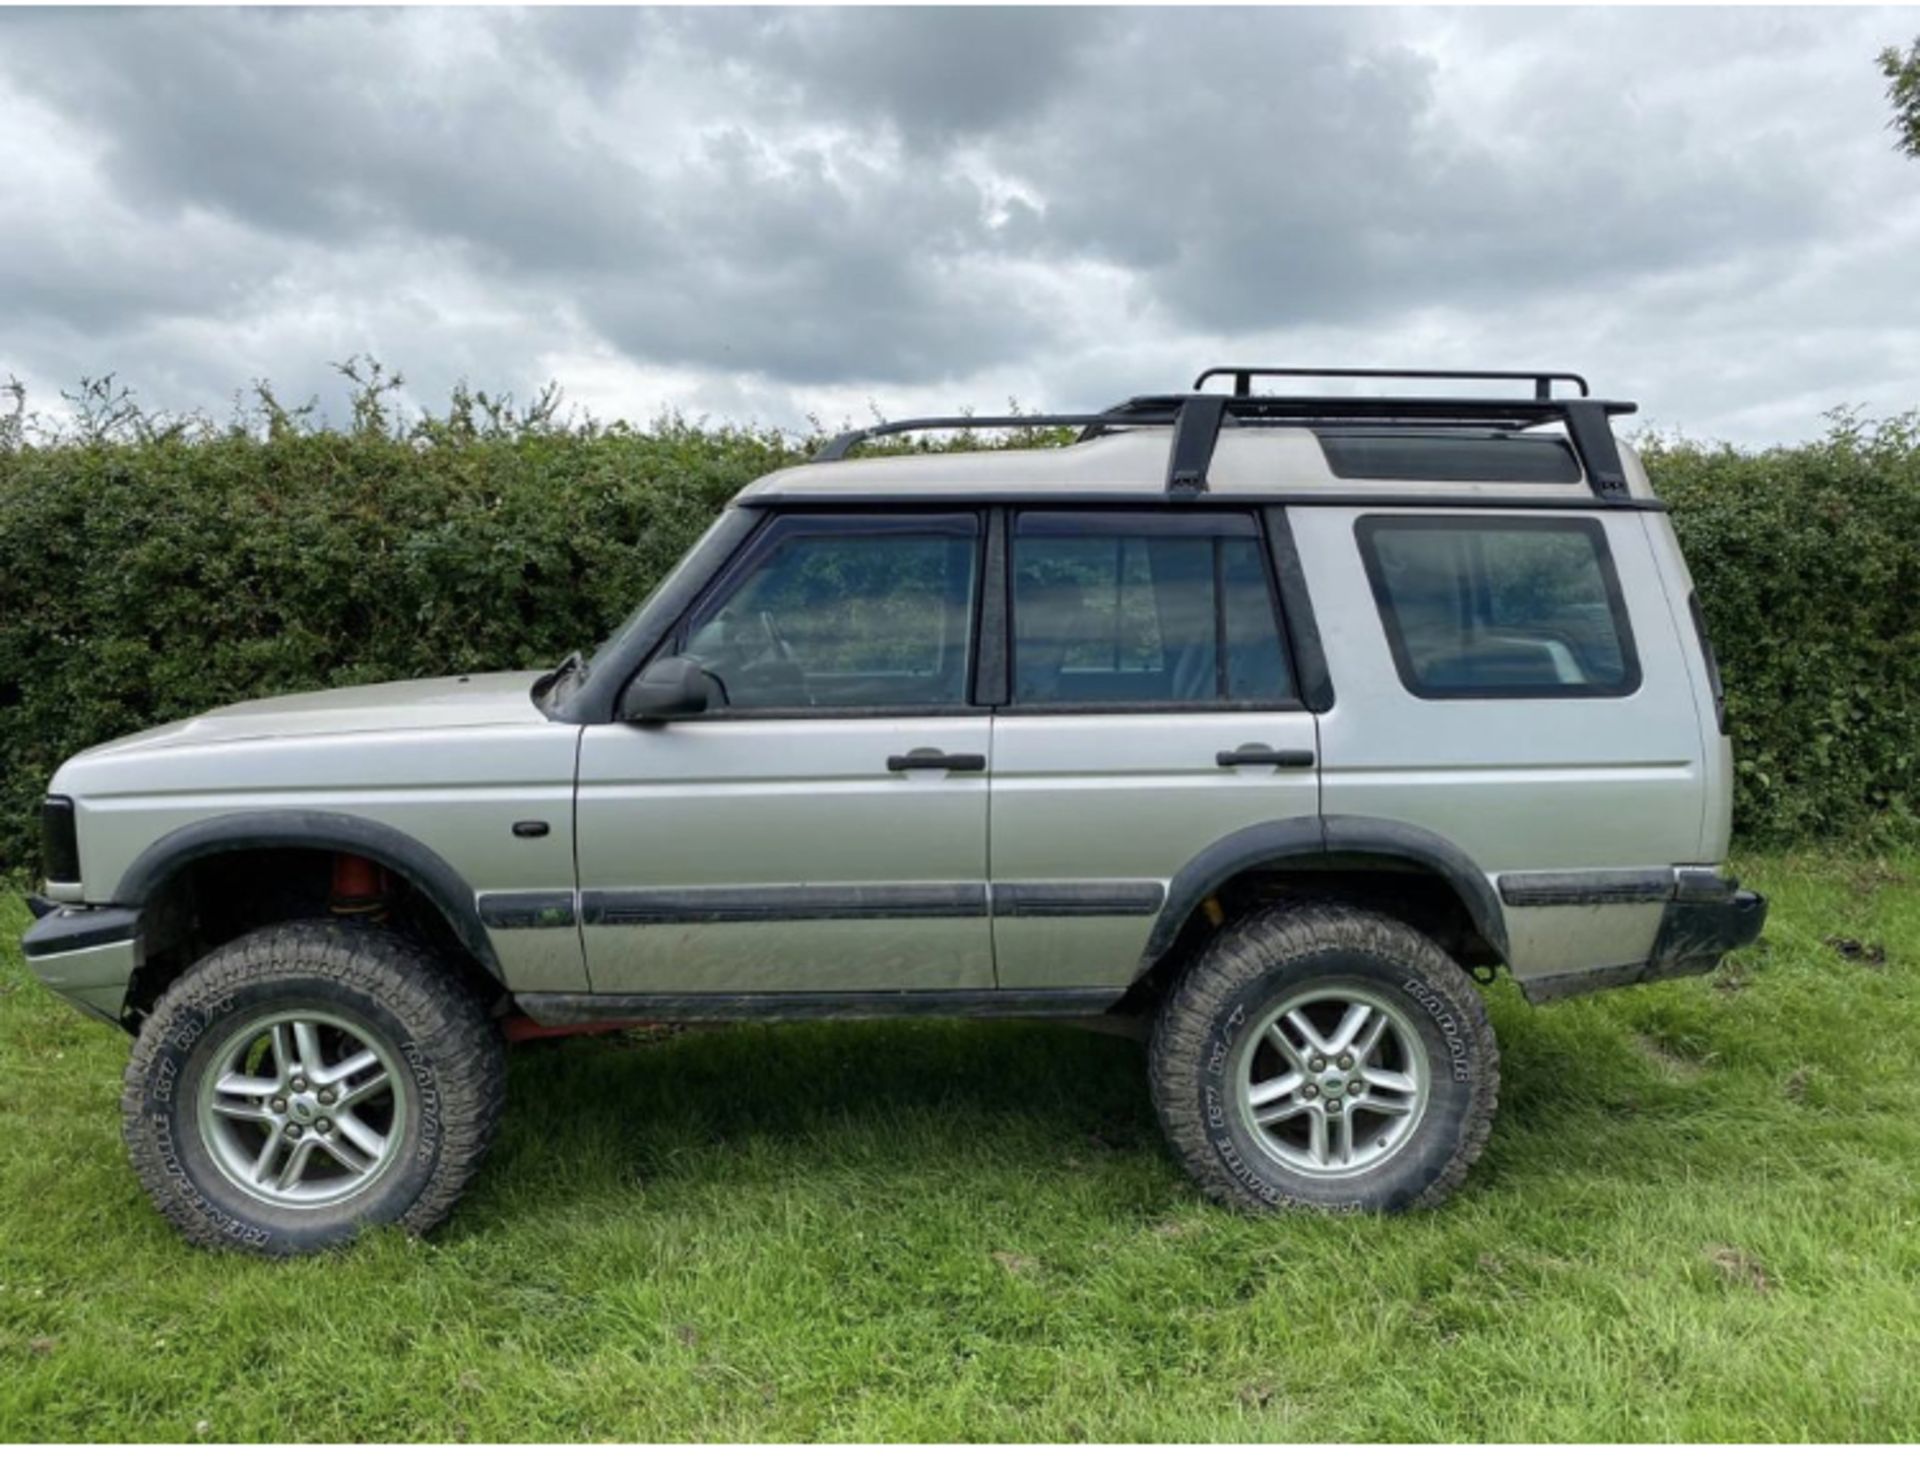 LAND ROVER DISCOVERY TD5 GS OFF ROAD 4X4X MONSTER TRUCK LOCATION: NORTH YORKSHIRE